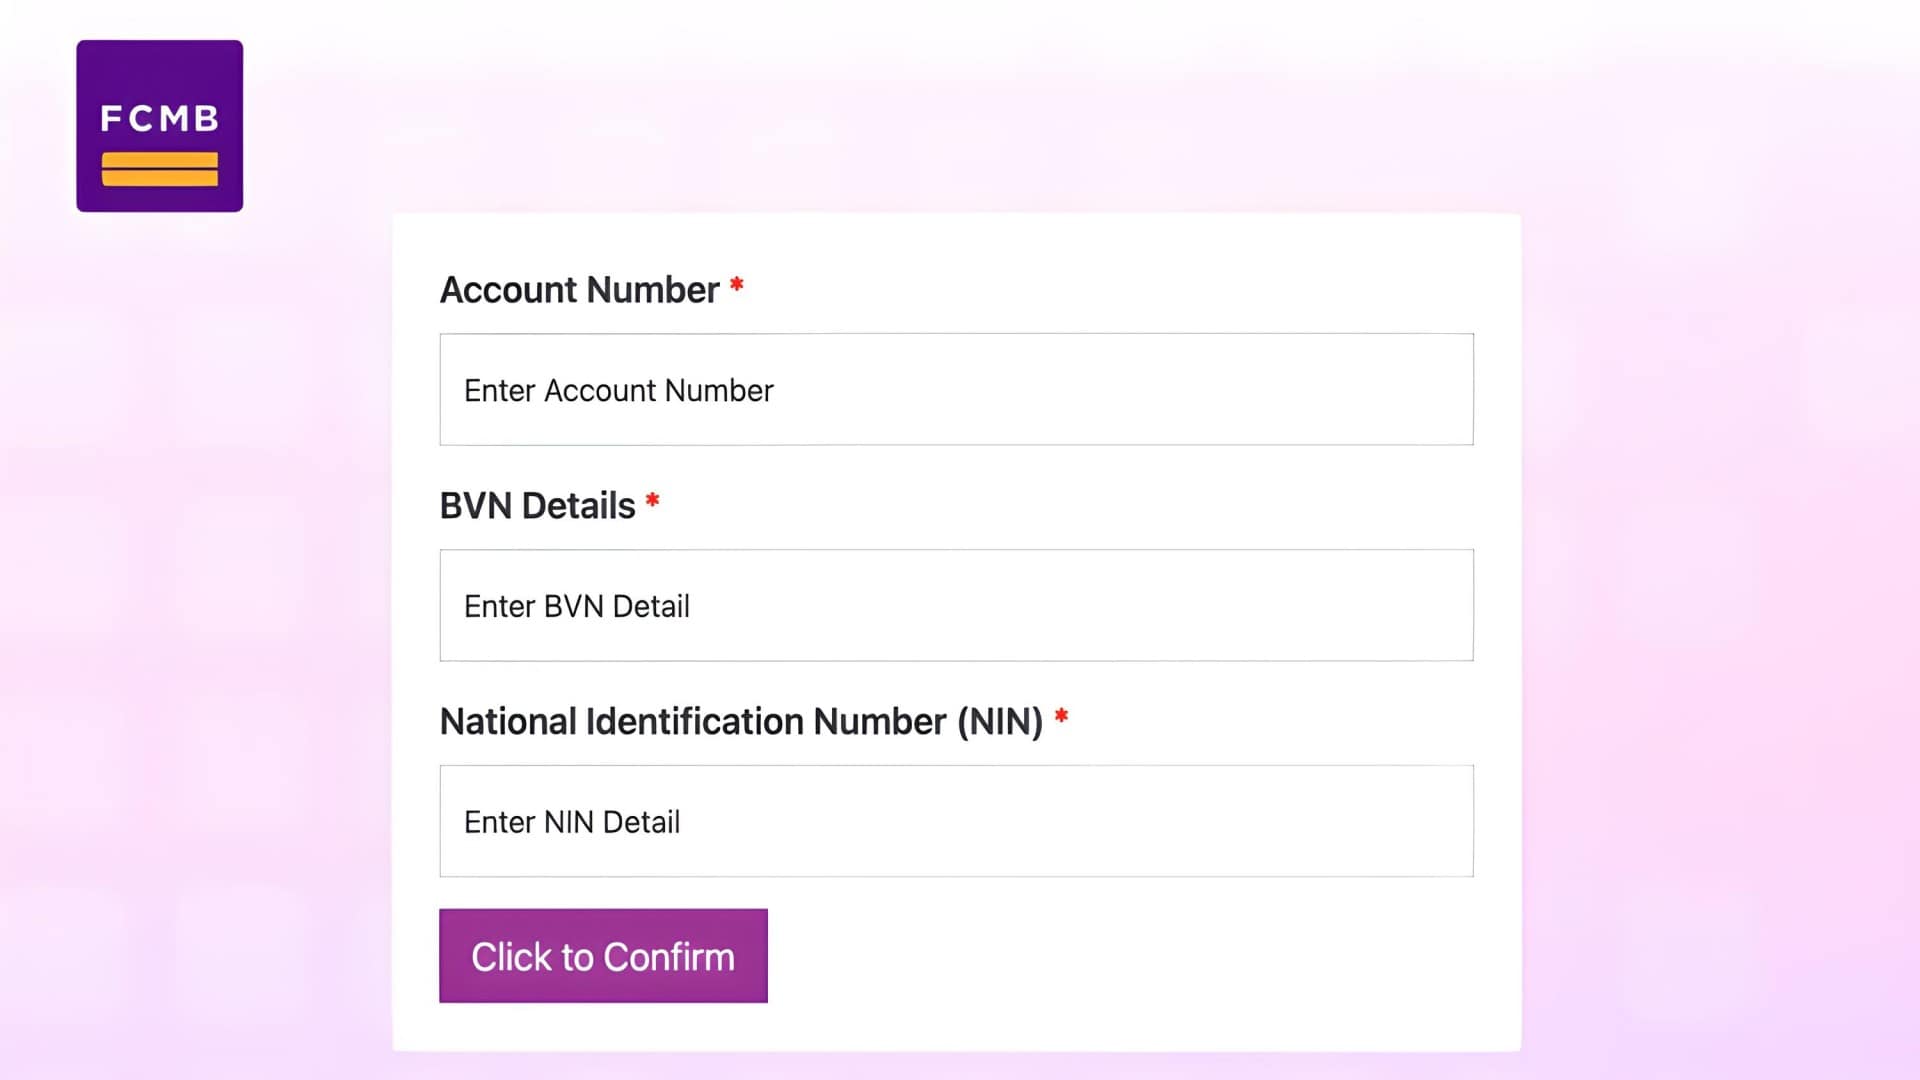 Link Your National Identification Number (NIN) to Your FCMB Account